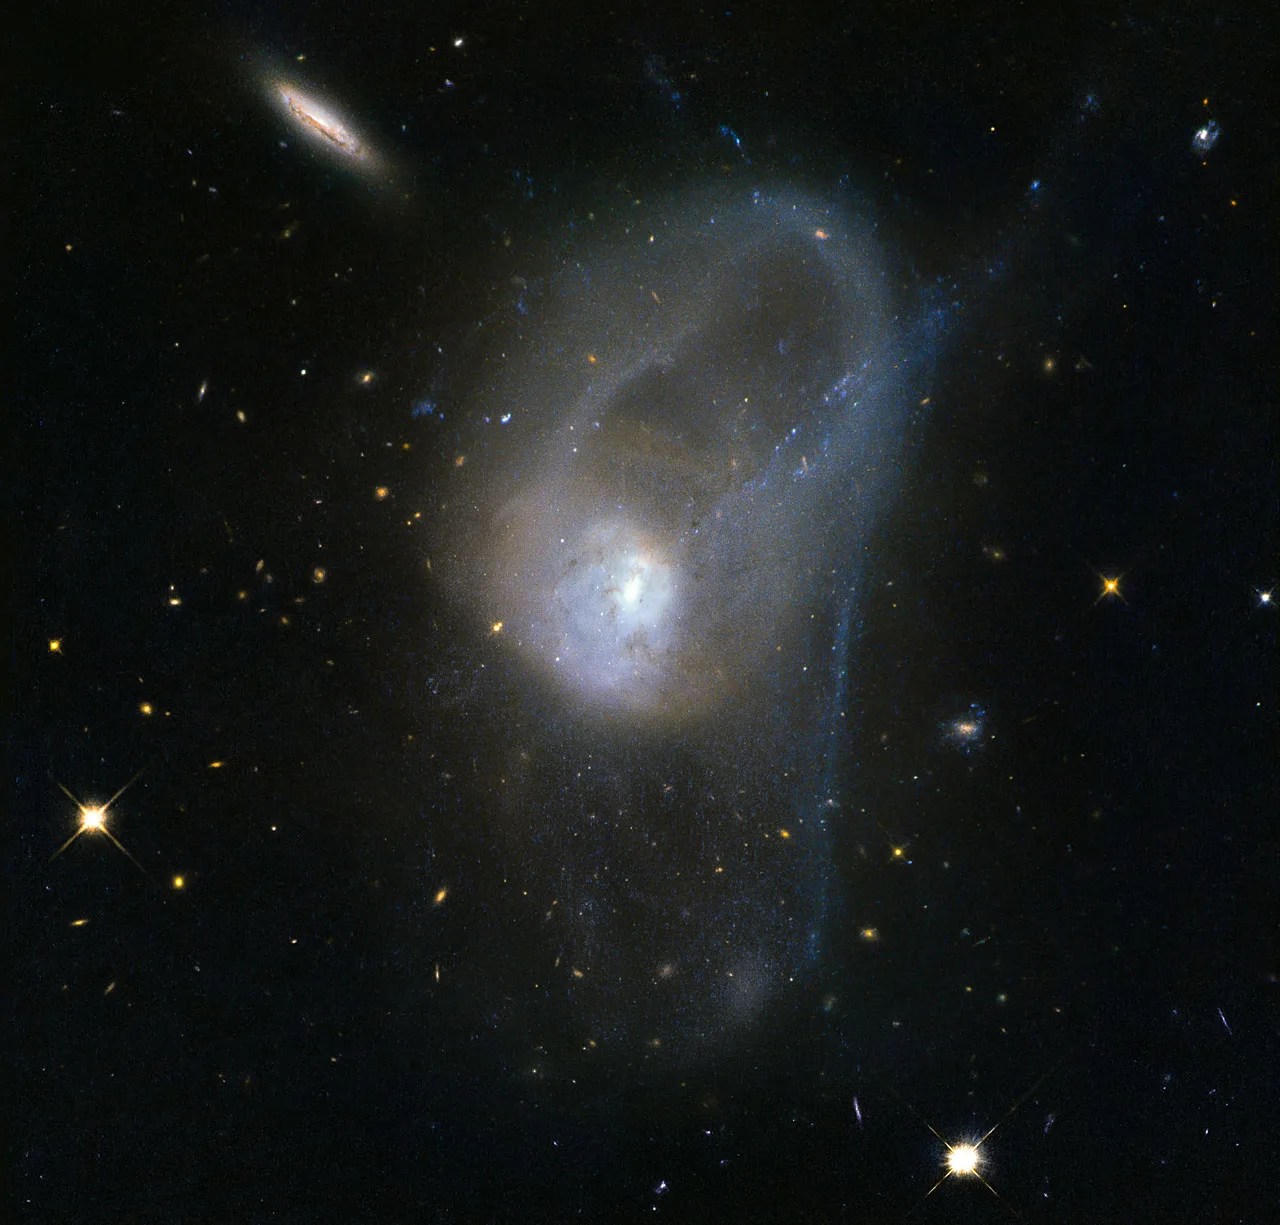 Pair of interacting galaxies merging, seen as a bright white central region of light surrounded by hazy trails of stars.